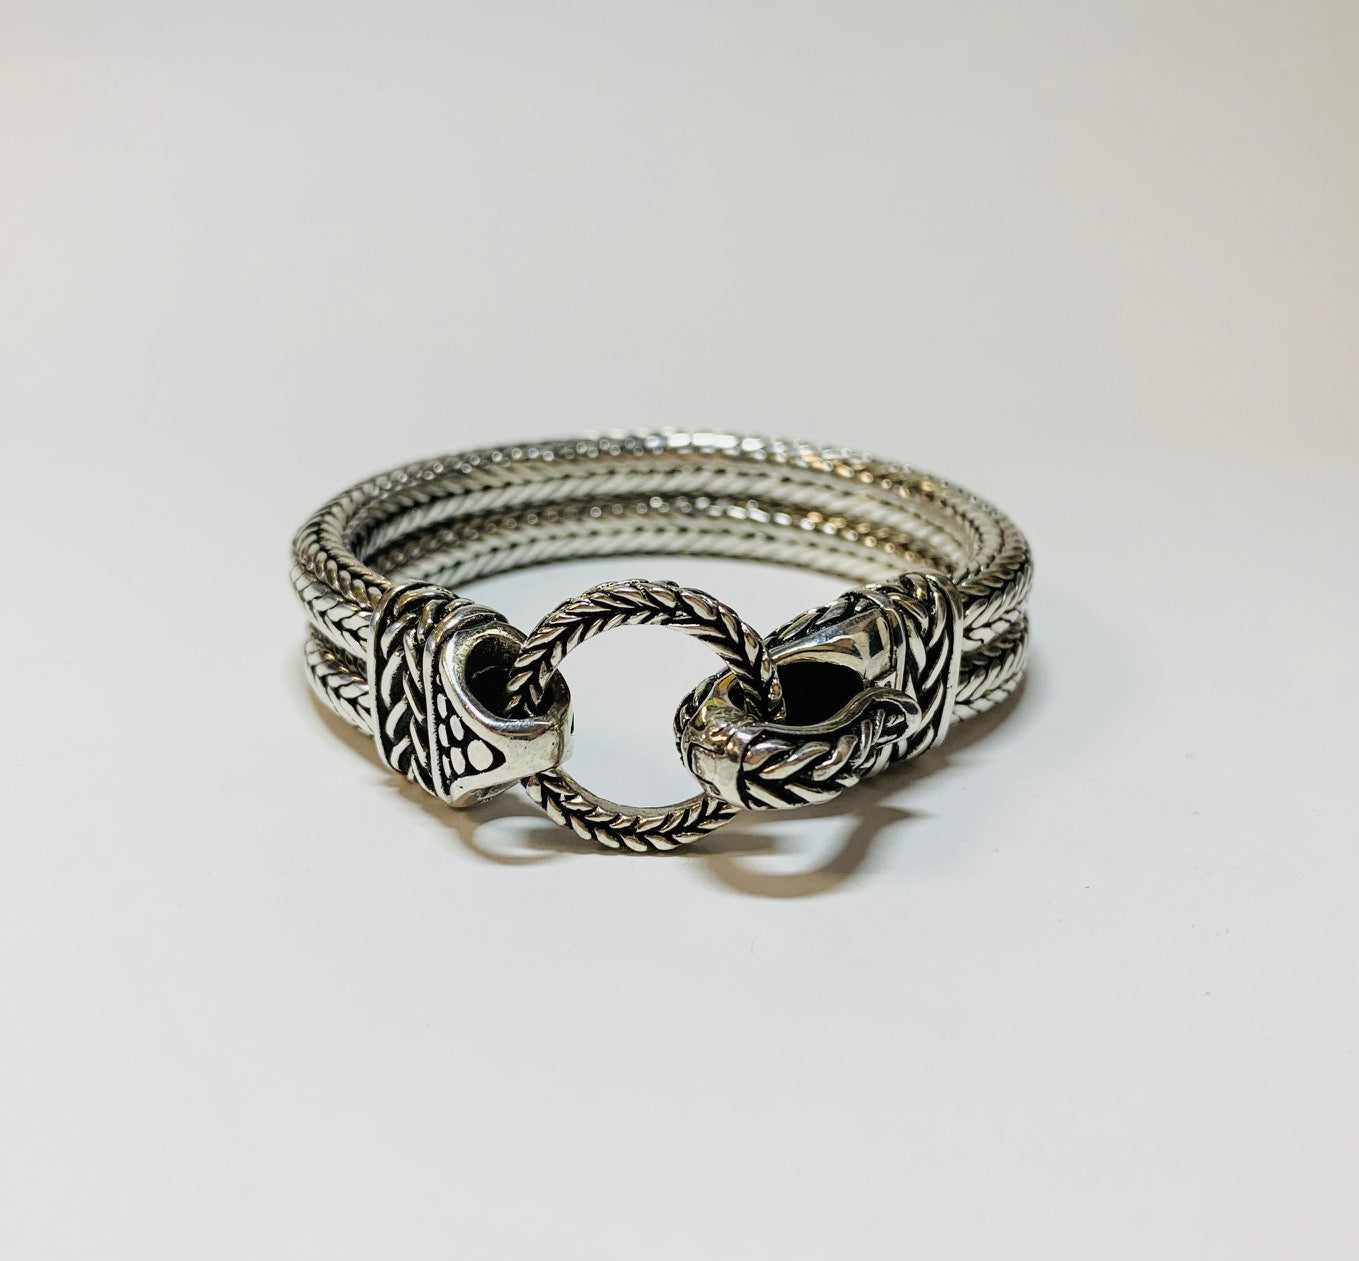 House of Bali By George Thomas Sterling Silver Braided Bracelet With A Hinged Clasp.